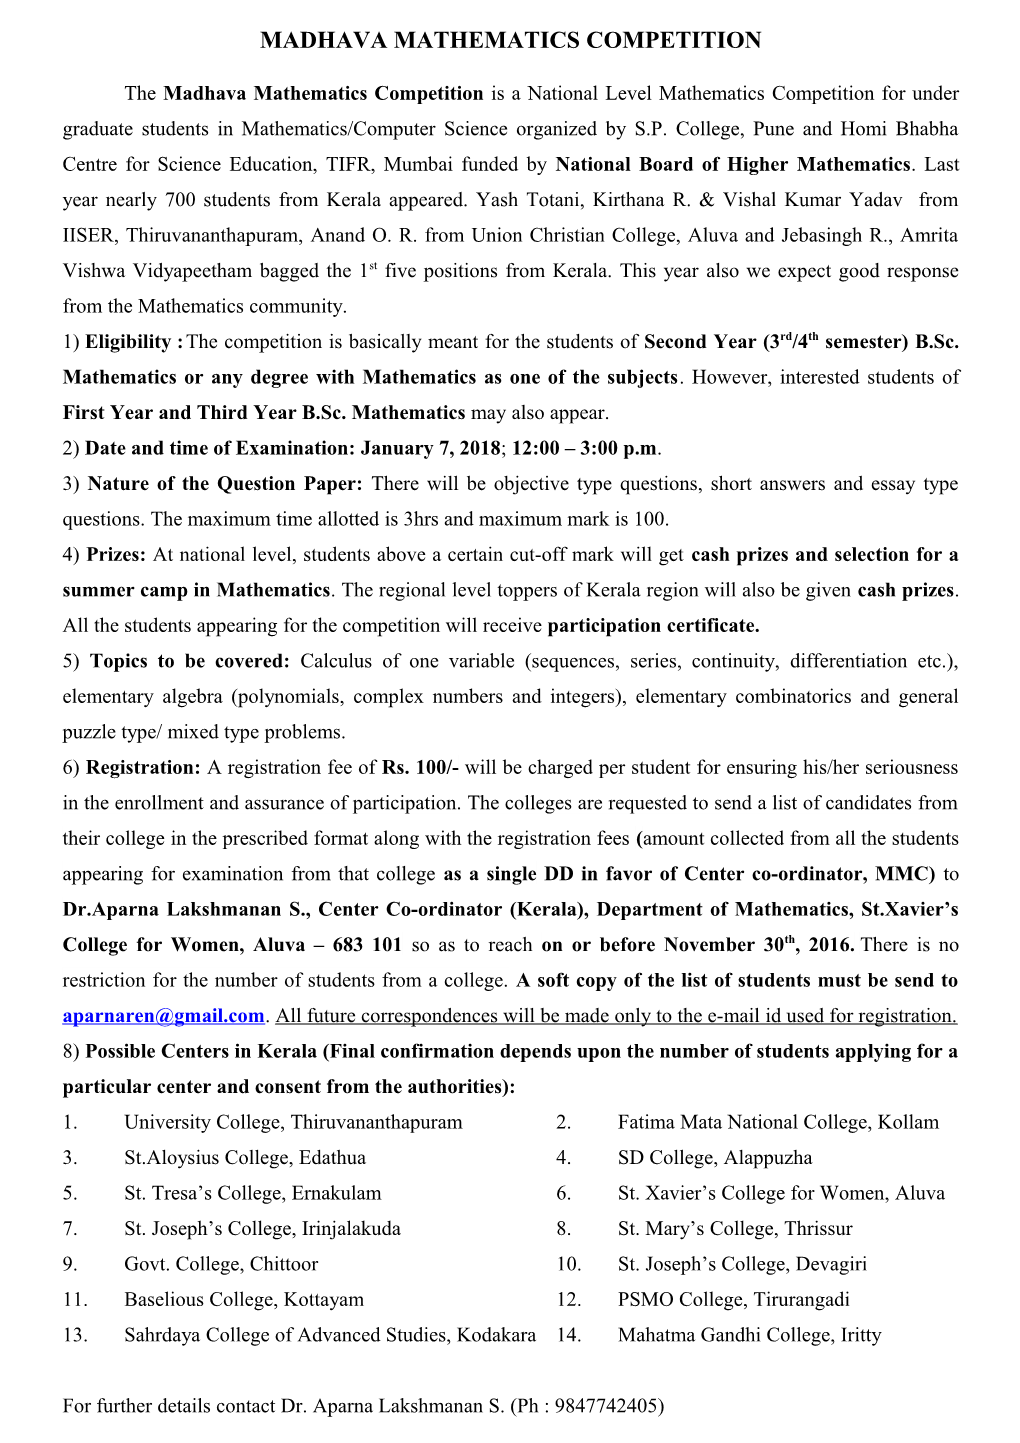 1) Name of the Competition: Madhava Mathematics Competition